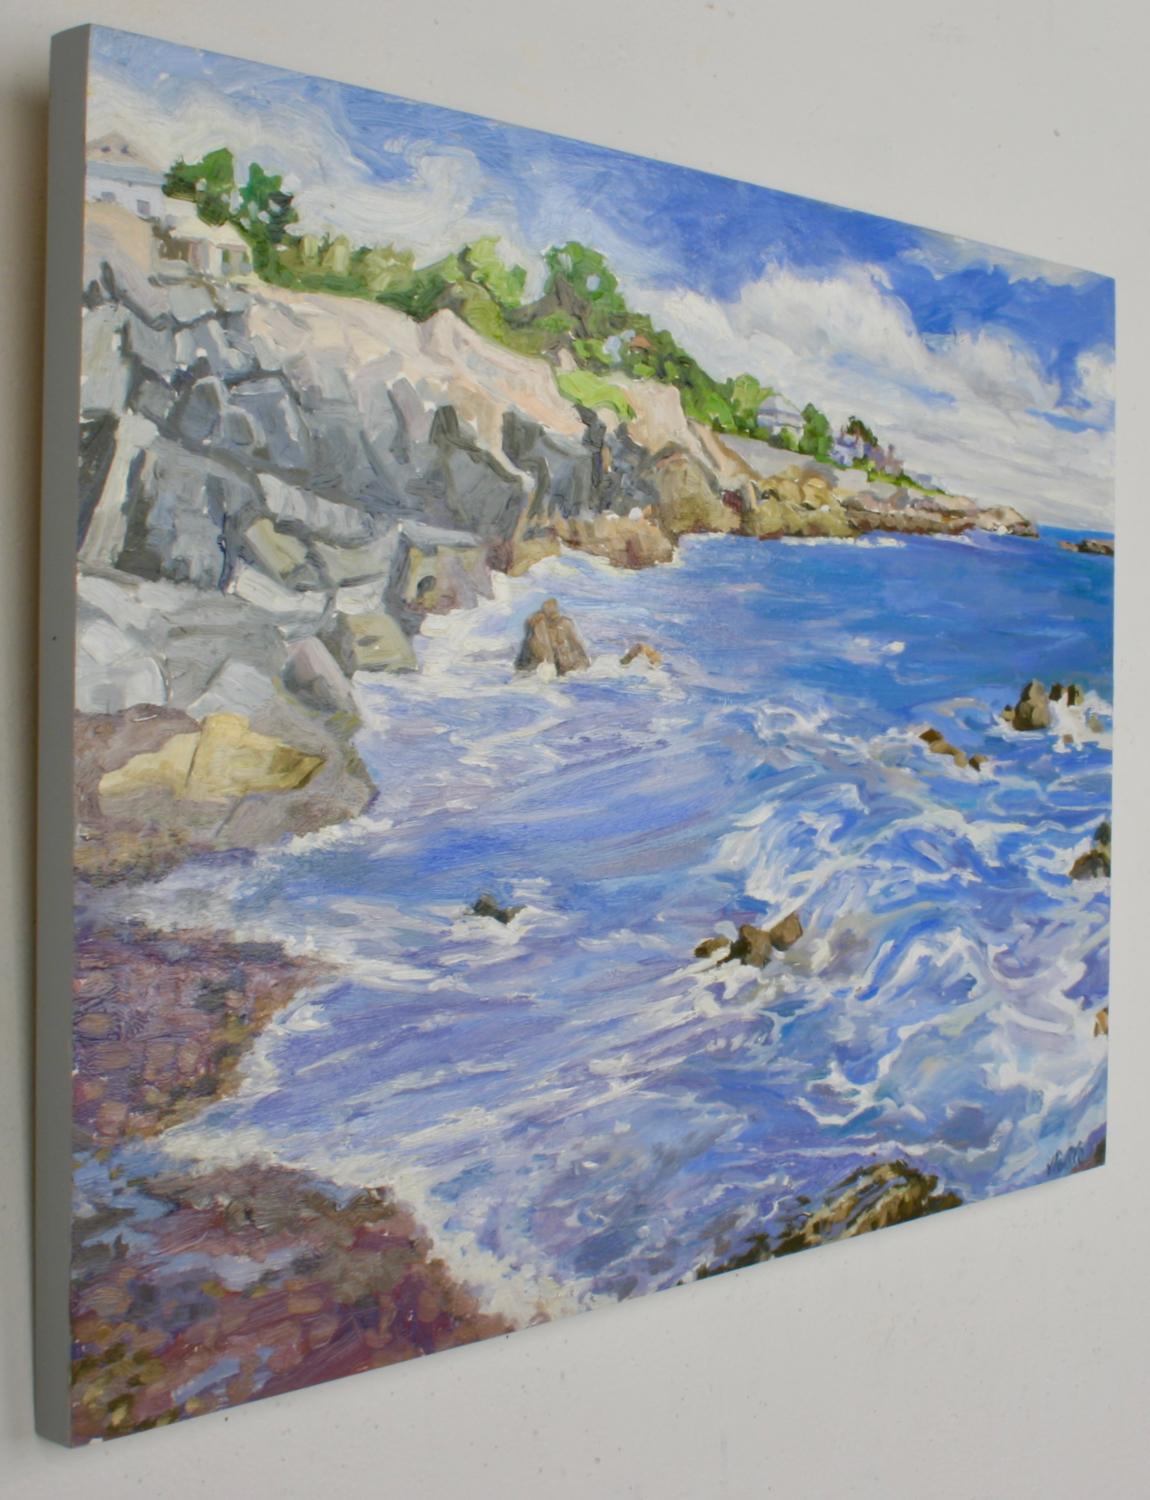 Jill Pottle’s seascape titled “The Neck II, Marblehead” is one of two paintings at the same location in Marblehead, MA. Part of a continuing series titled “On Location,” this 24 X 18 inch oil painting is on a primed panel. The paint is rich in